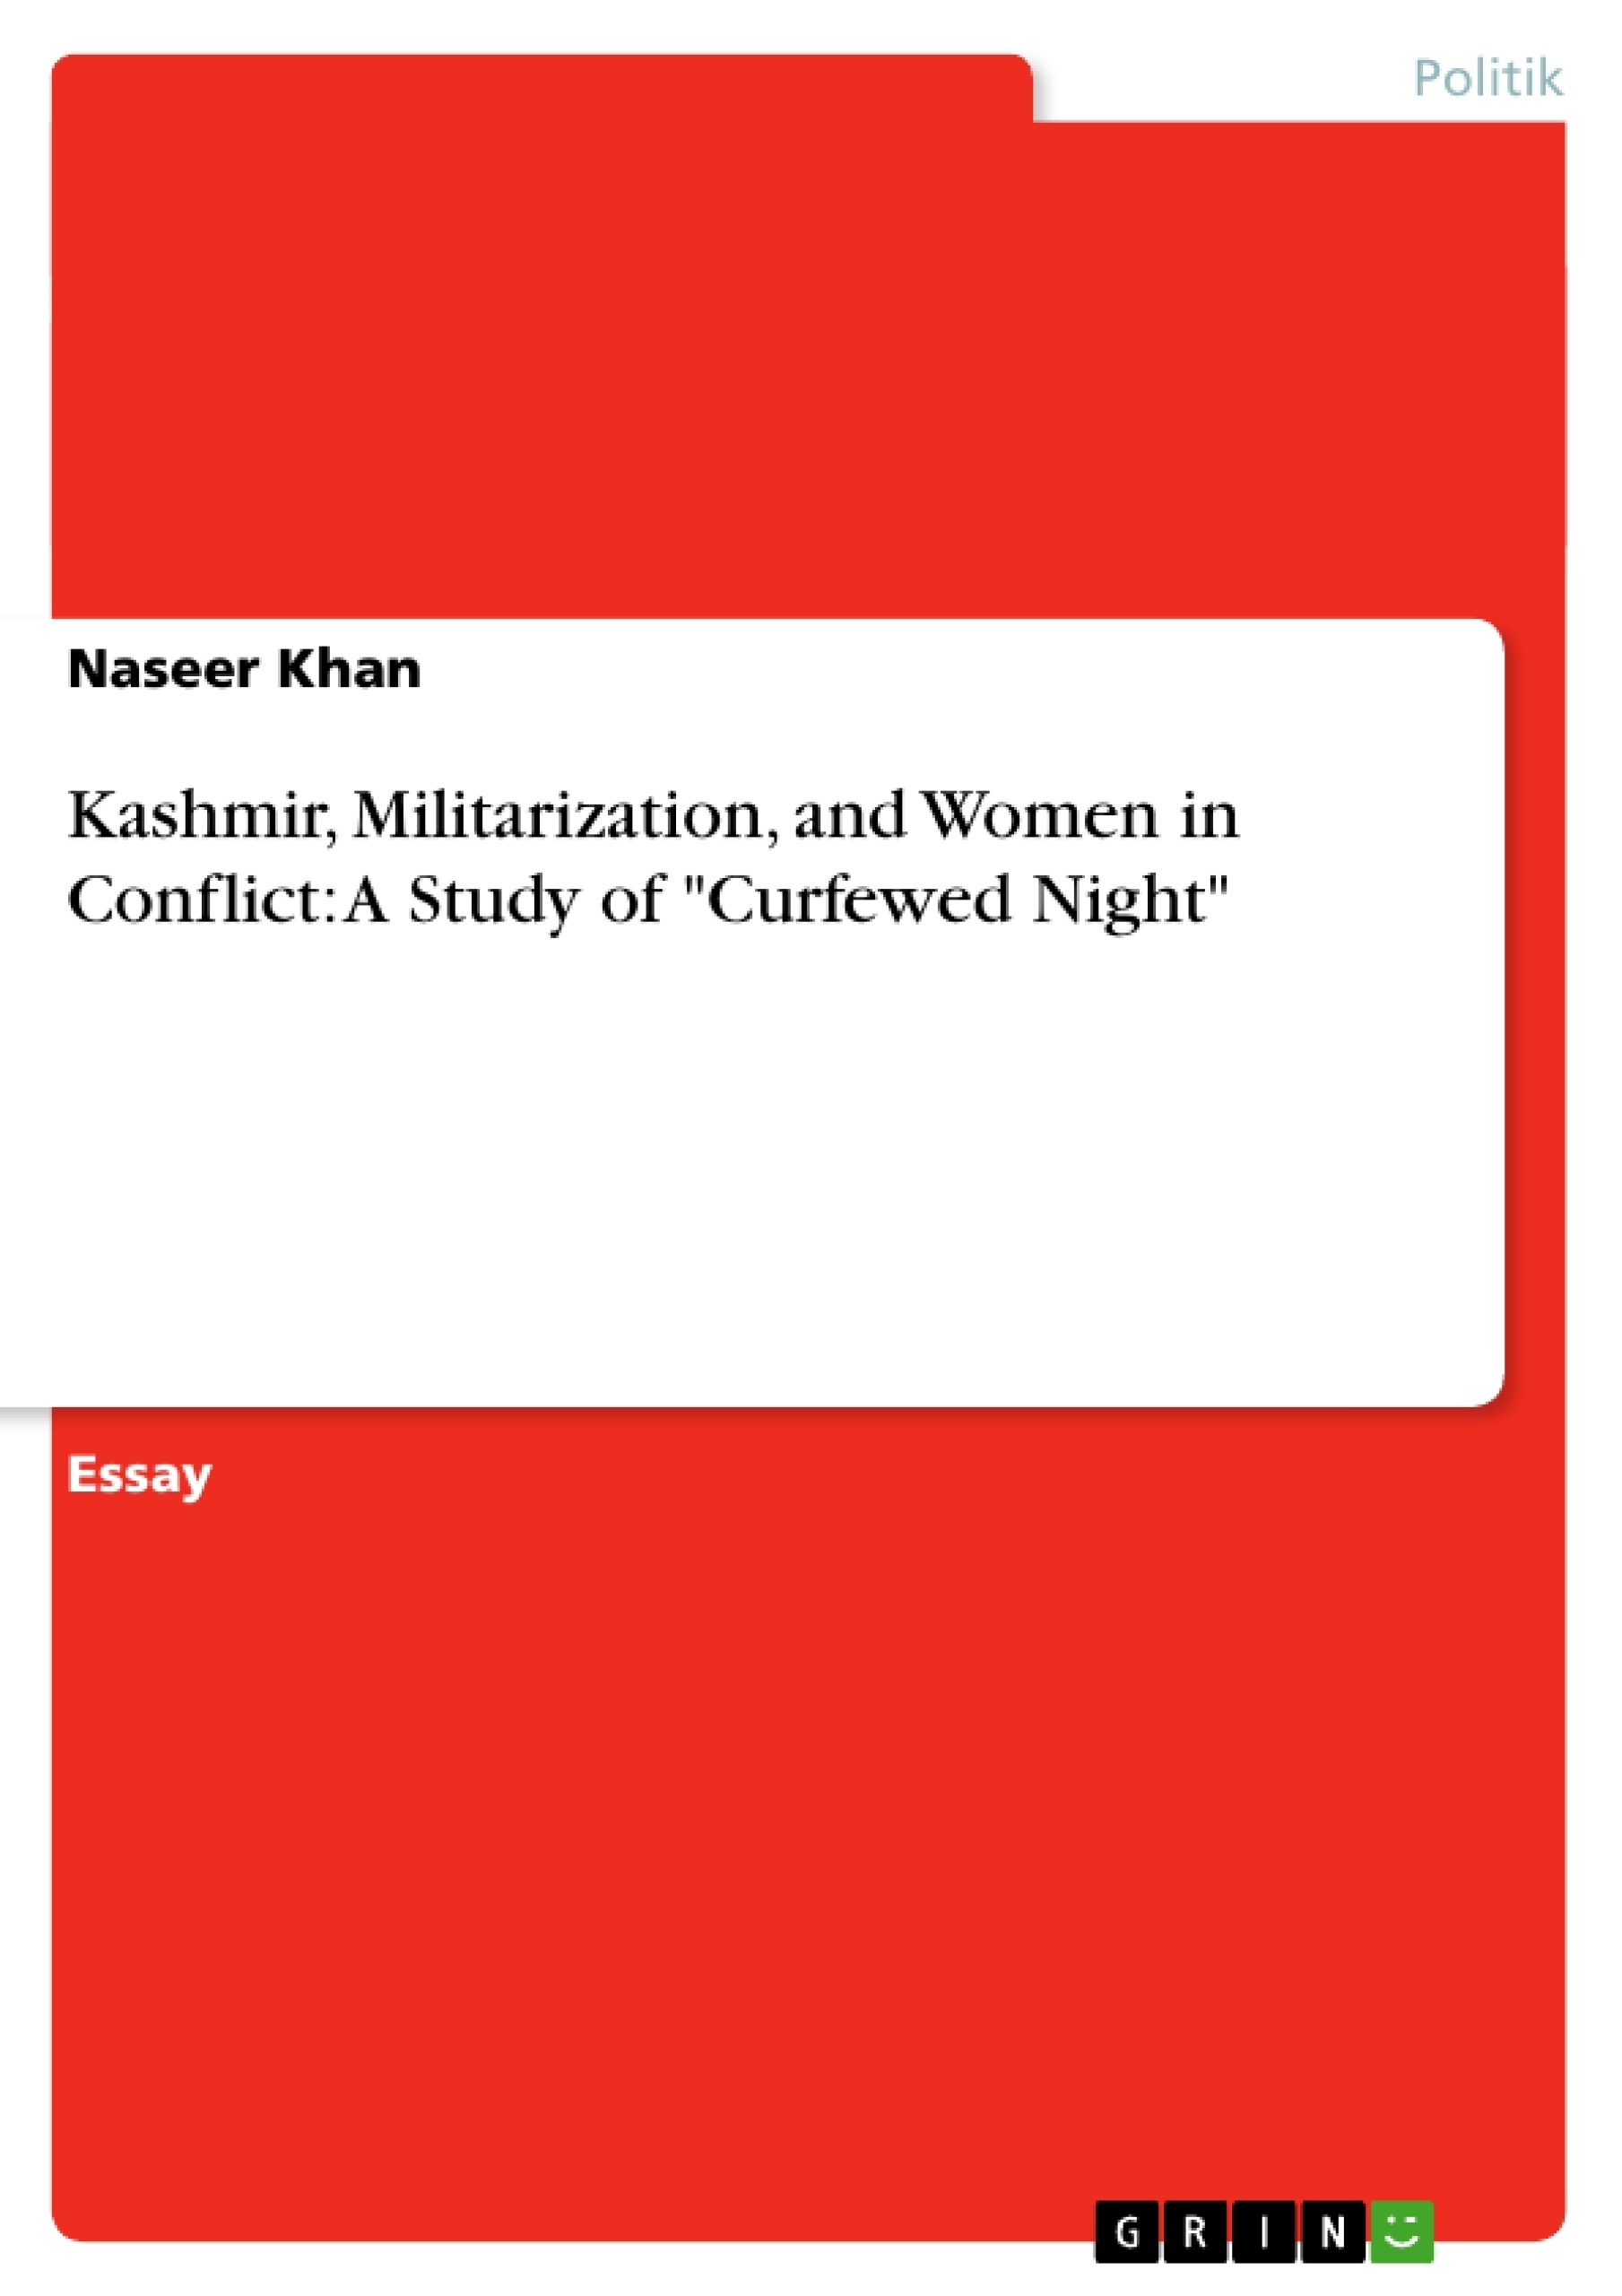 Título: Kashmir, Militarization, and Women in Conflict: A Study of "Curfewed Night"